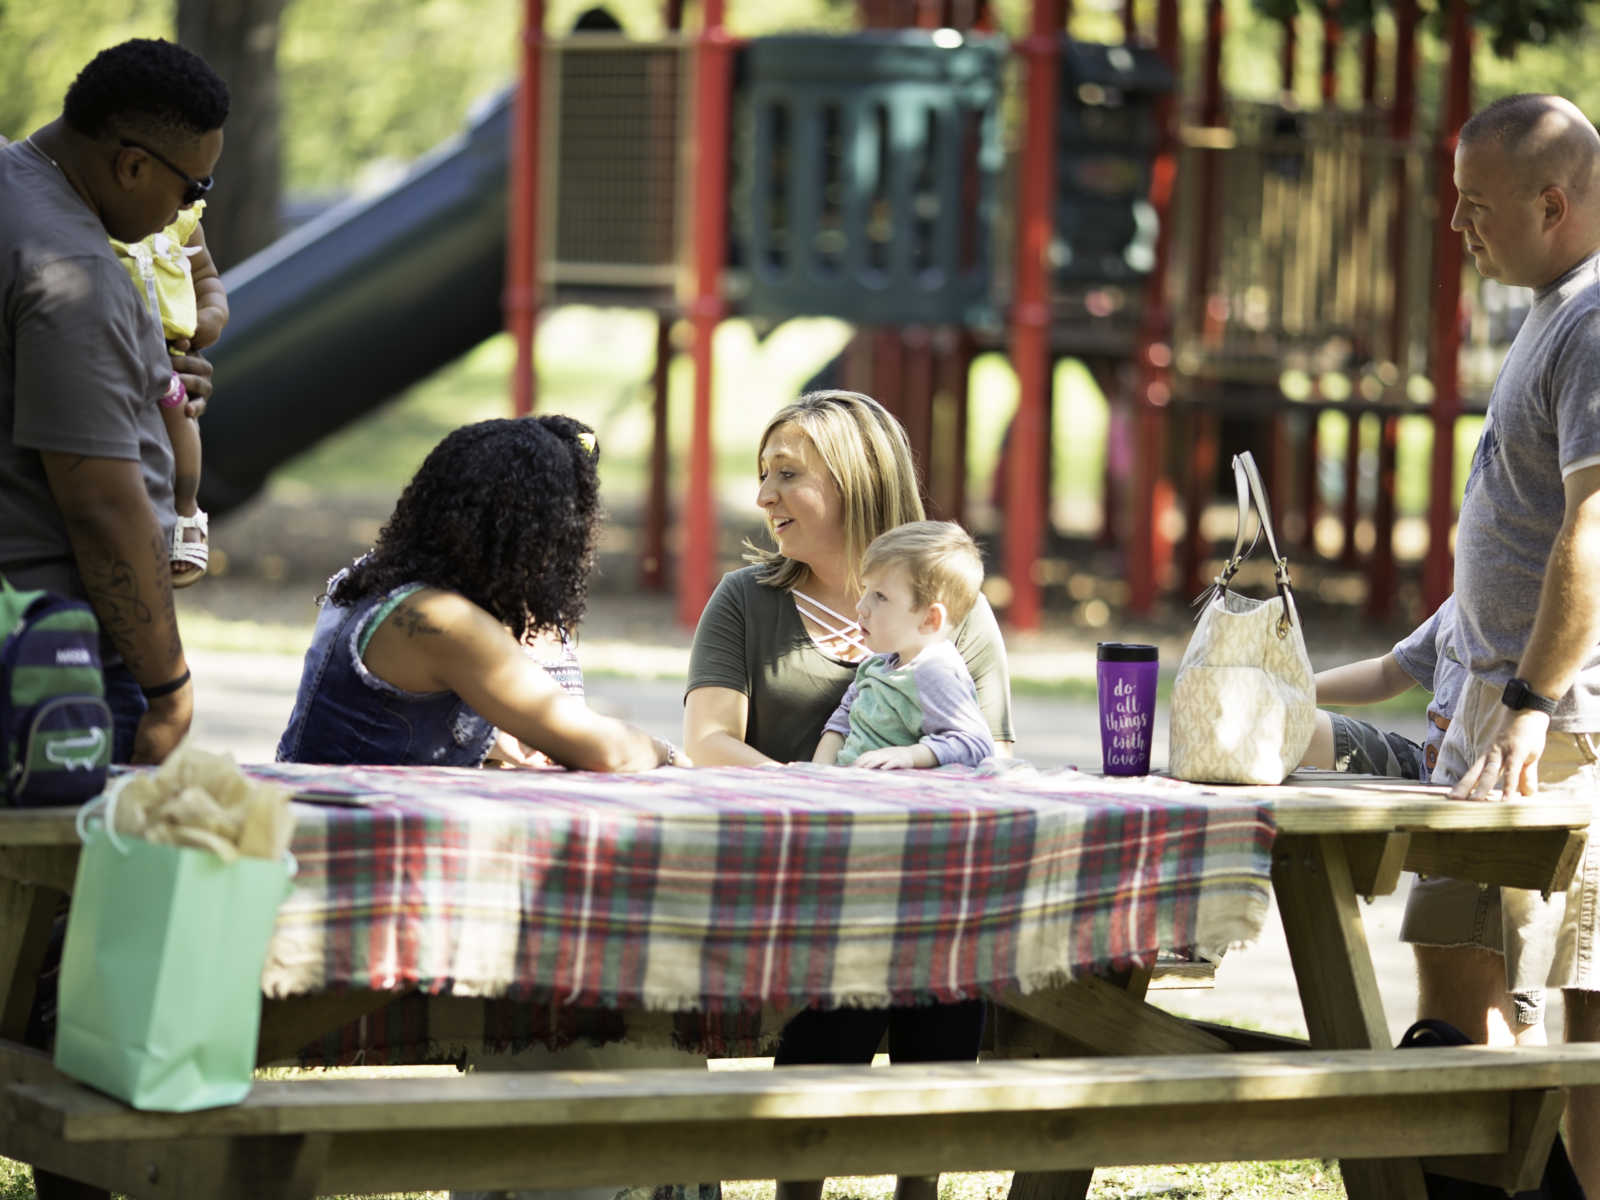 families sit down to talk at picnic table at a playground